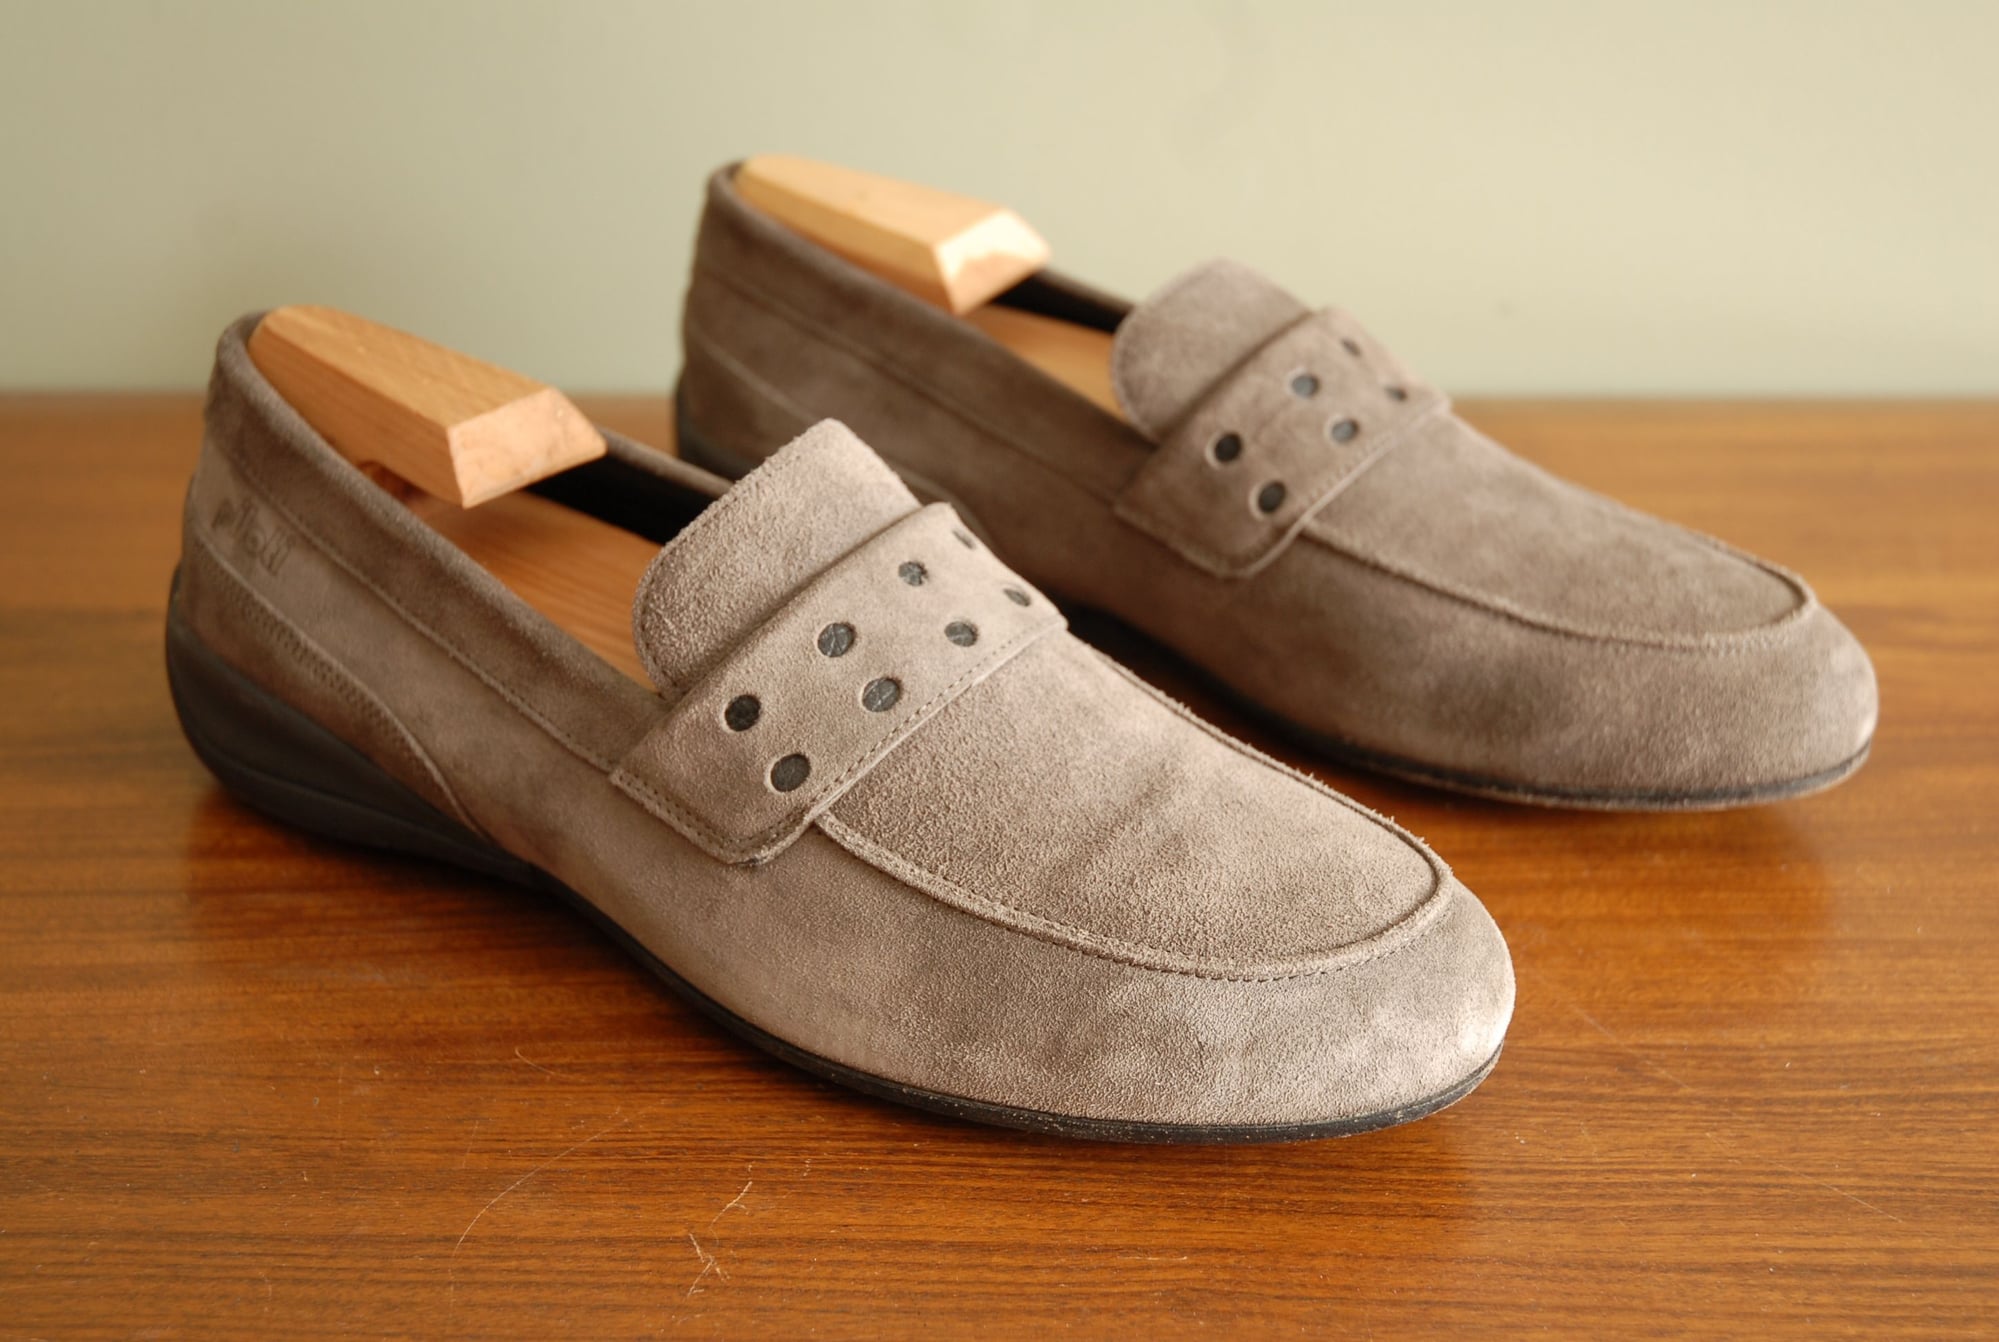 Miscellaneous - Piloti Primo Italian Suede Driving Loafer, size 41 Euro - Used - 0  All Models - Nepean, ON K2G1Z9, Canada